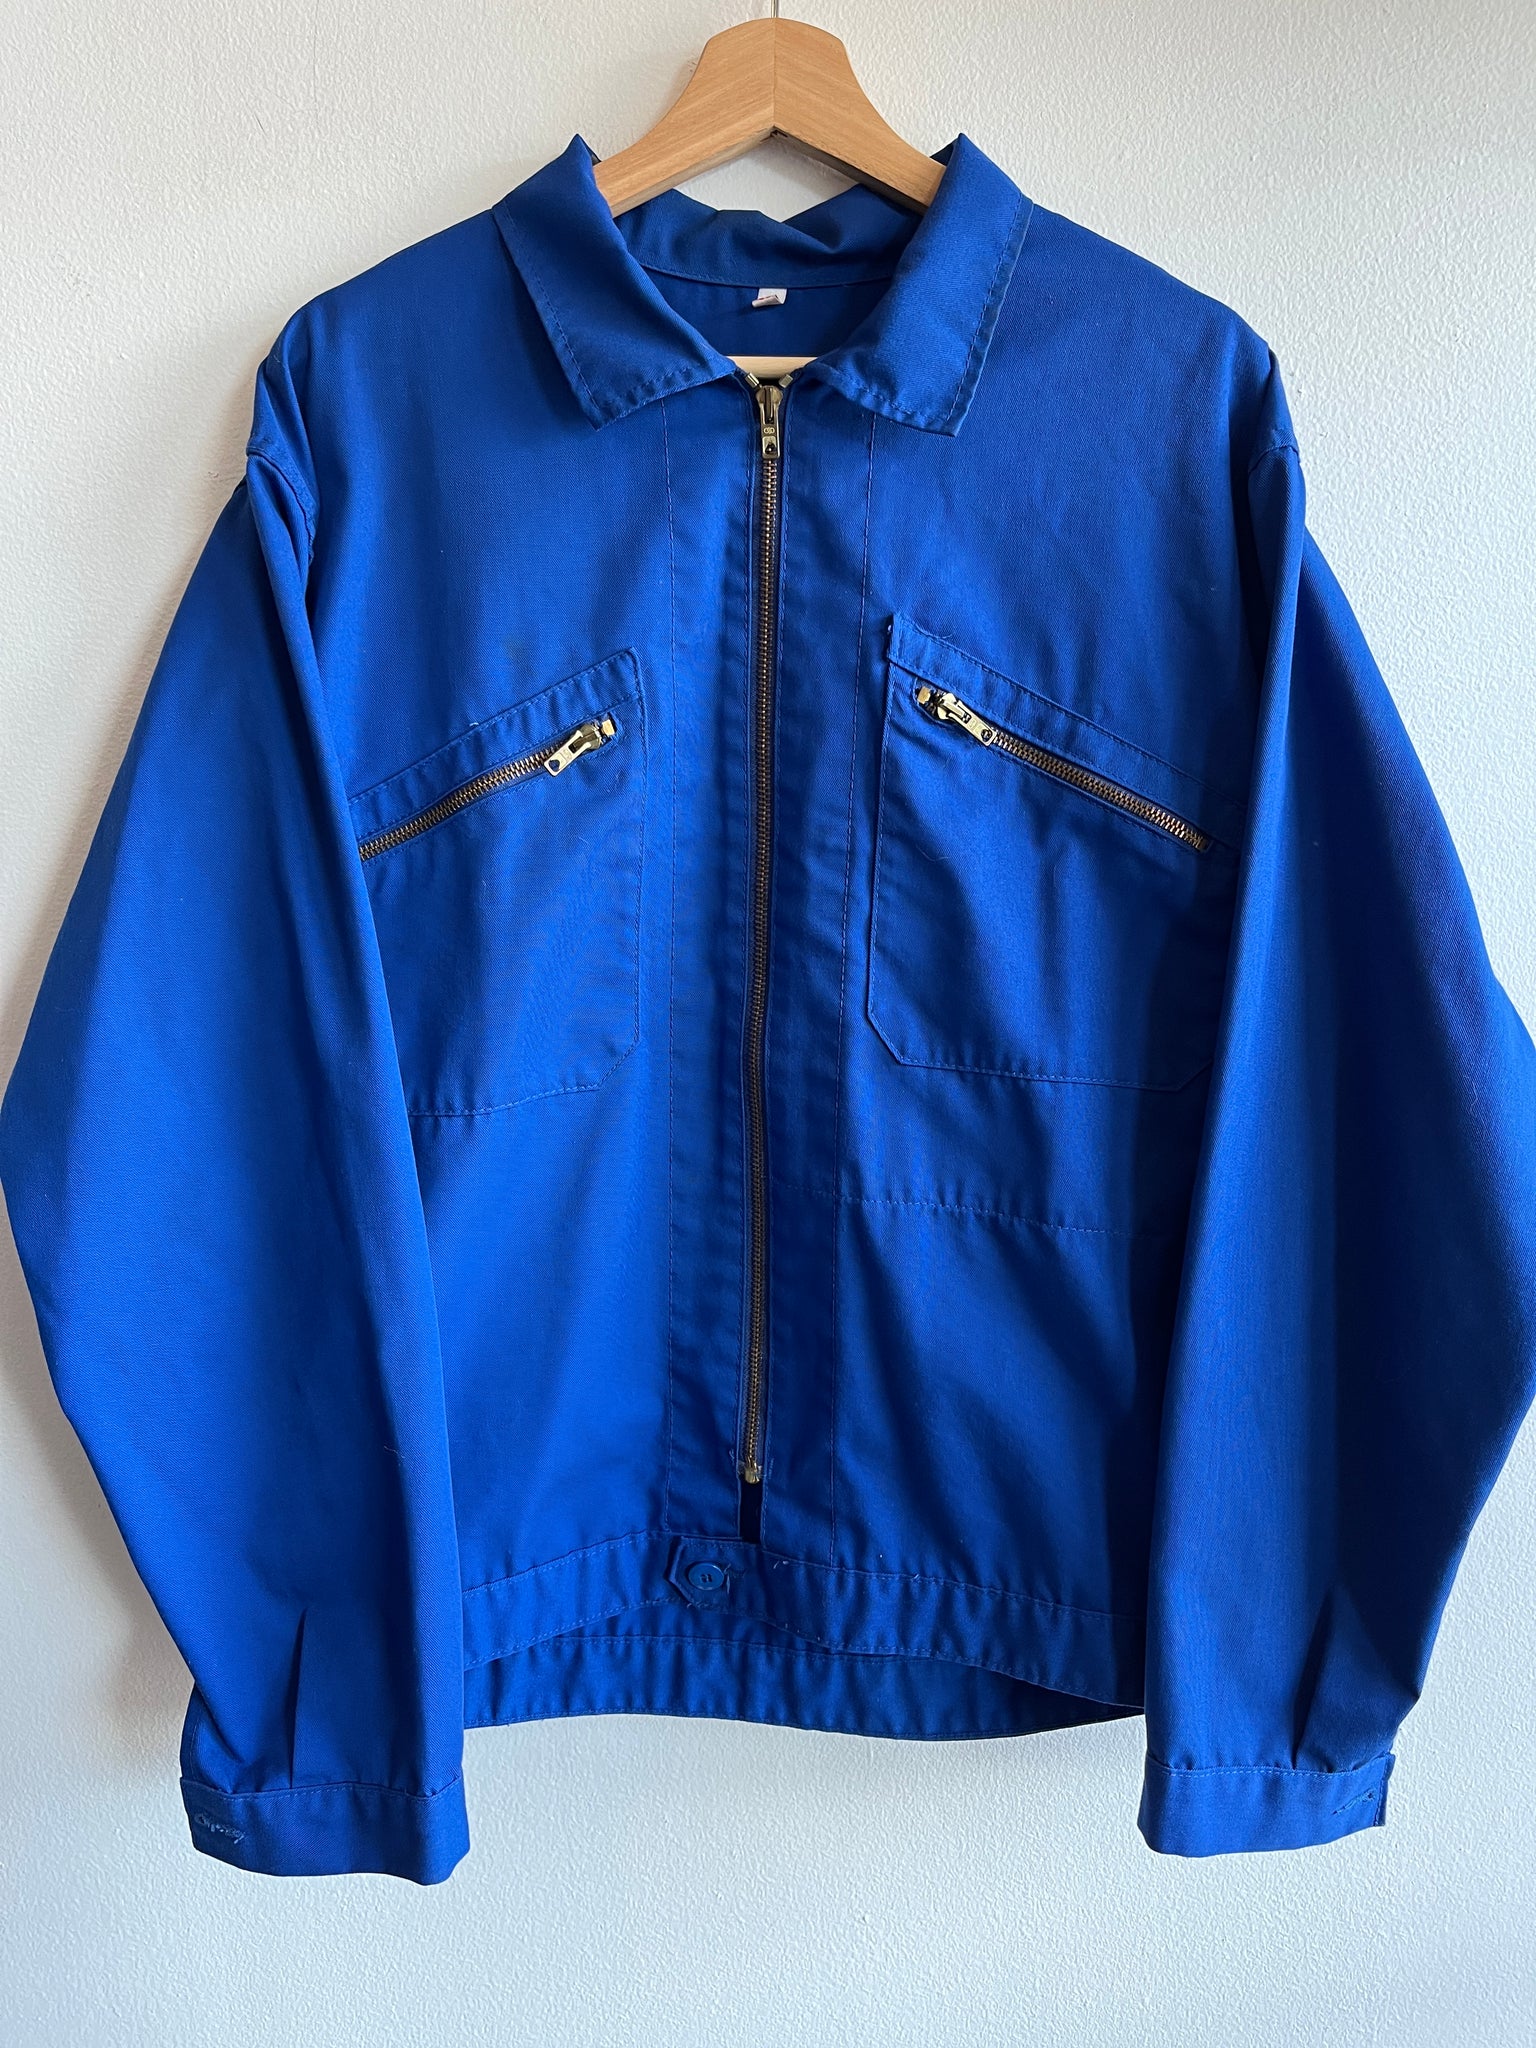 Vintage 1970’s French Cyclist Jacket